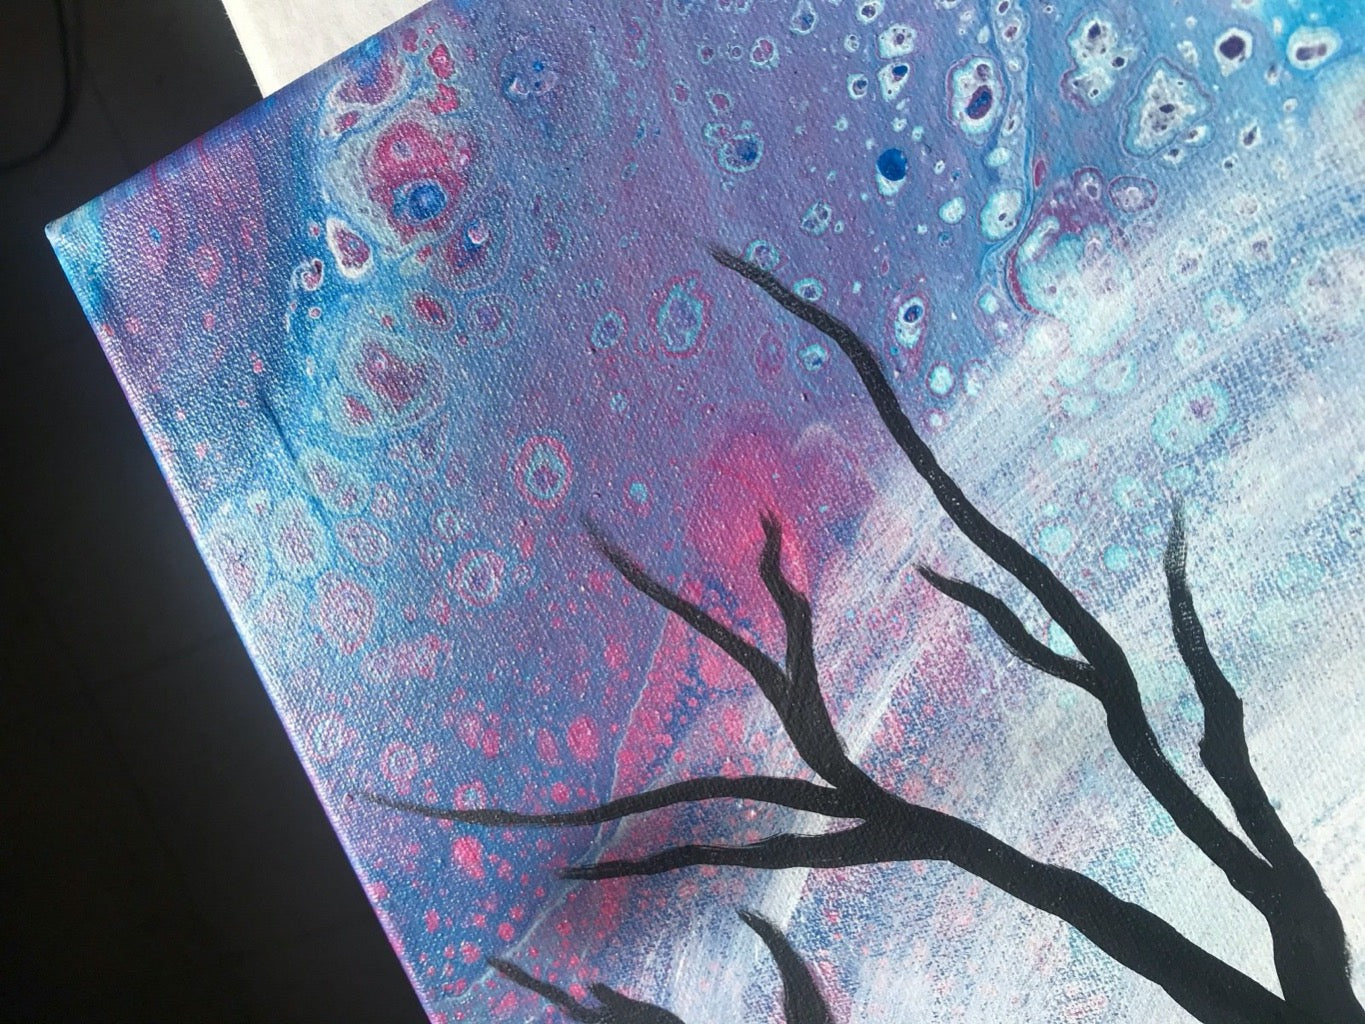 Moon Tree - Original Acrylic Mixed Media Textured Surreal 4 piece Painting by Marianna Mills - 22.5"x23" detail of the paint